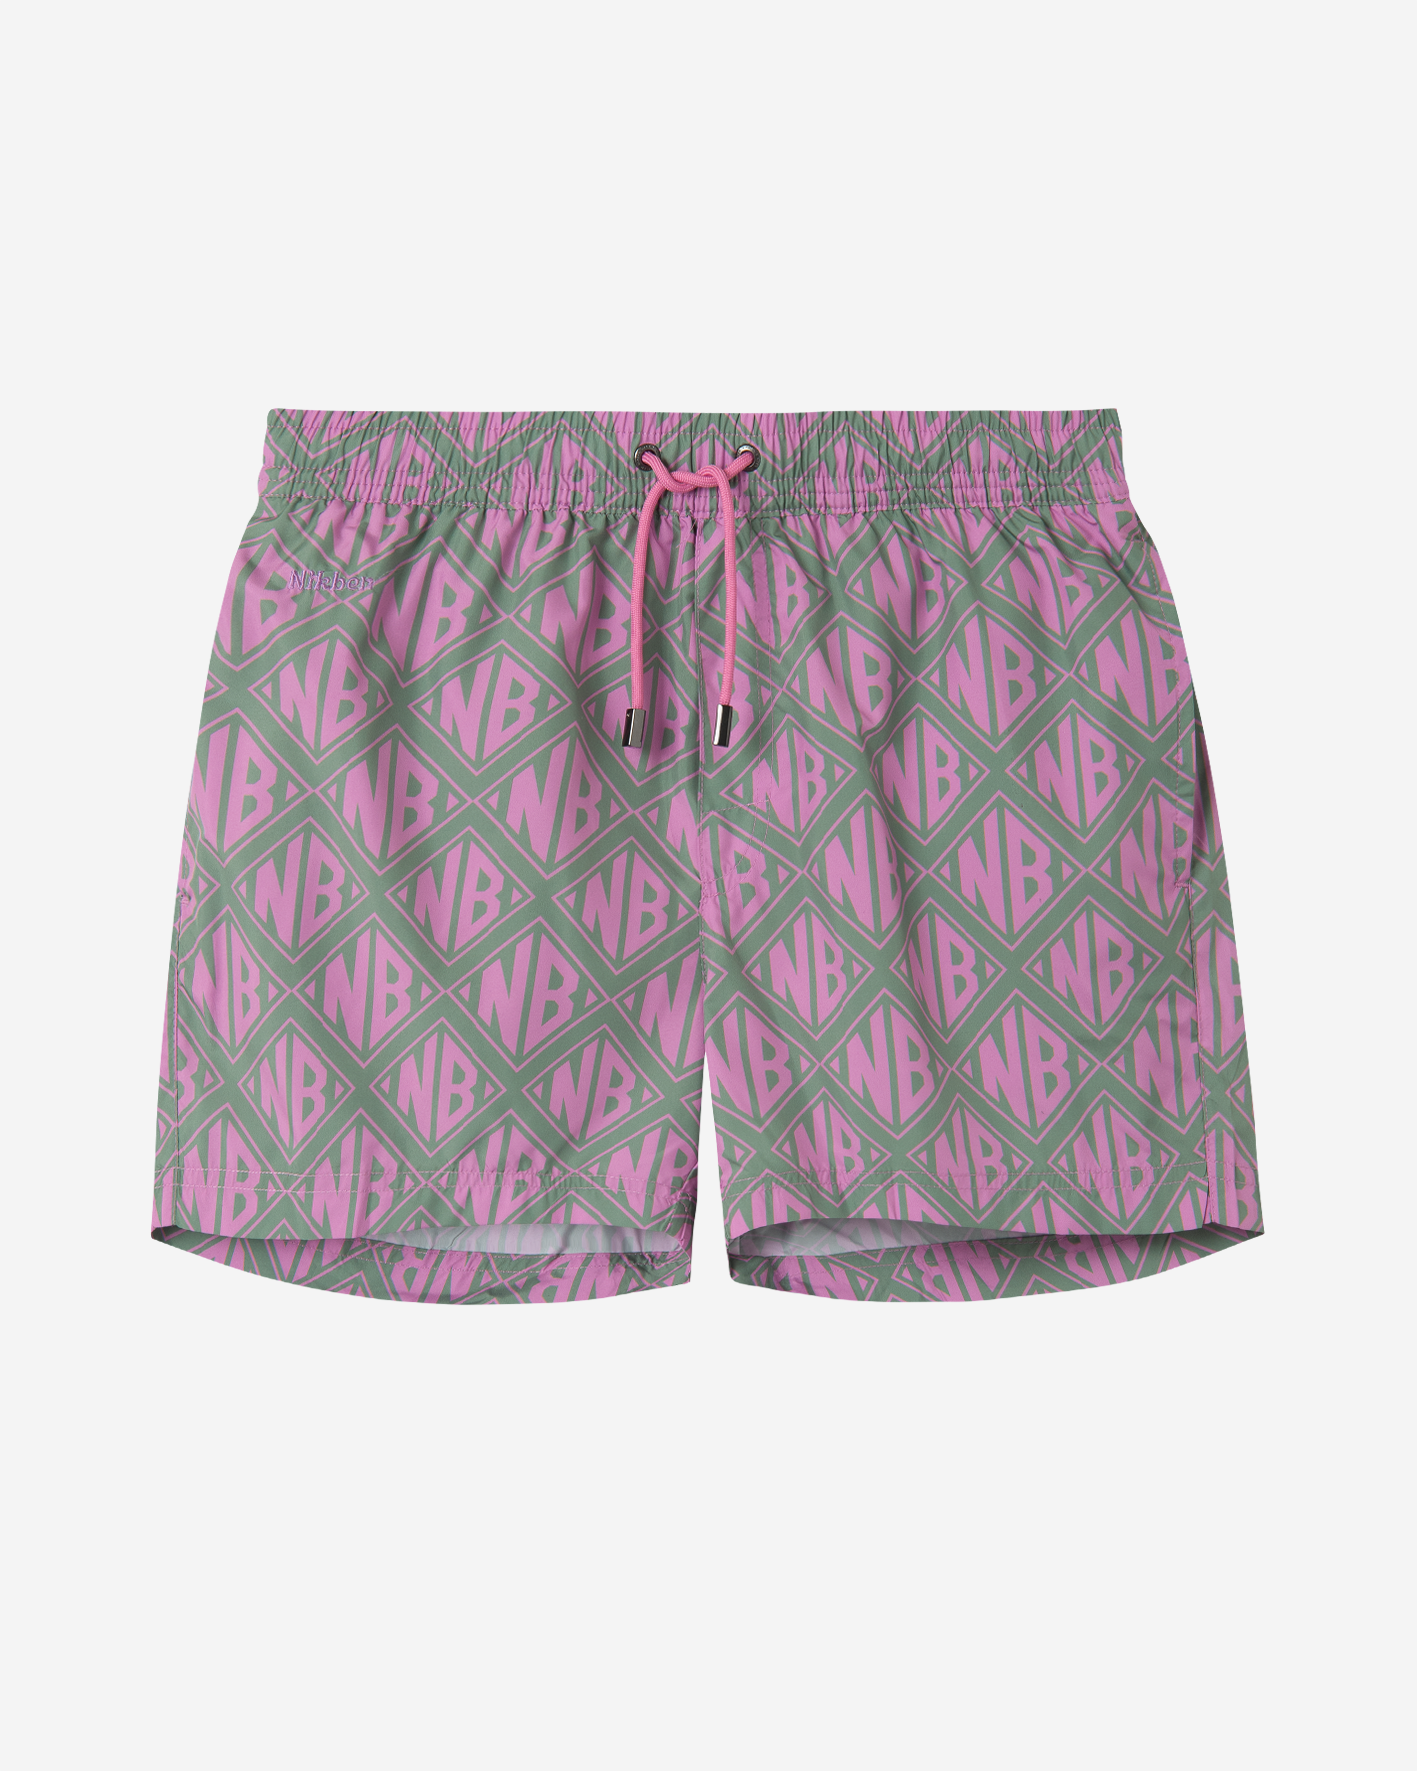 Olive and pink swim trunks with pink 